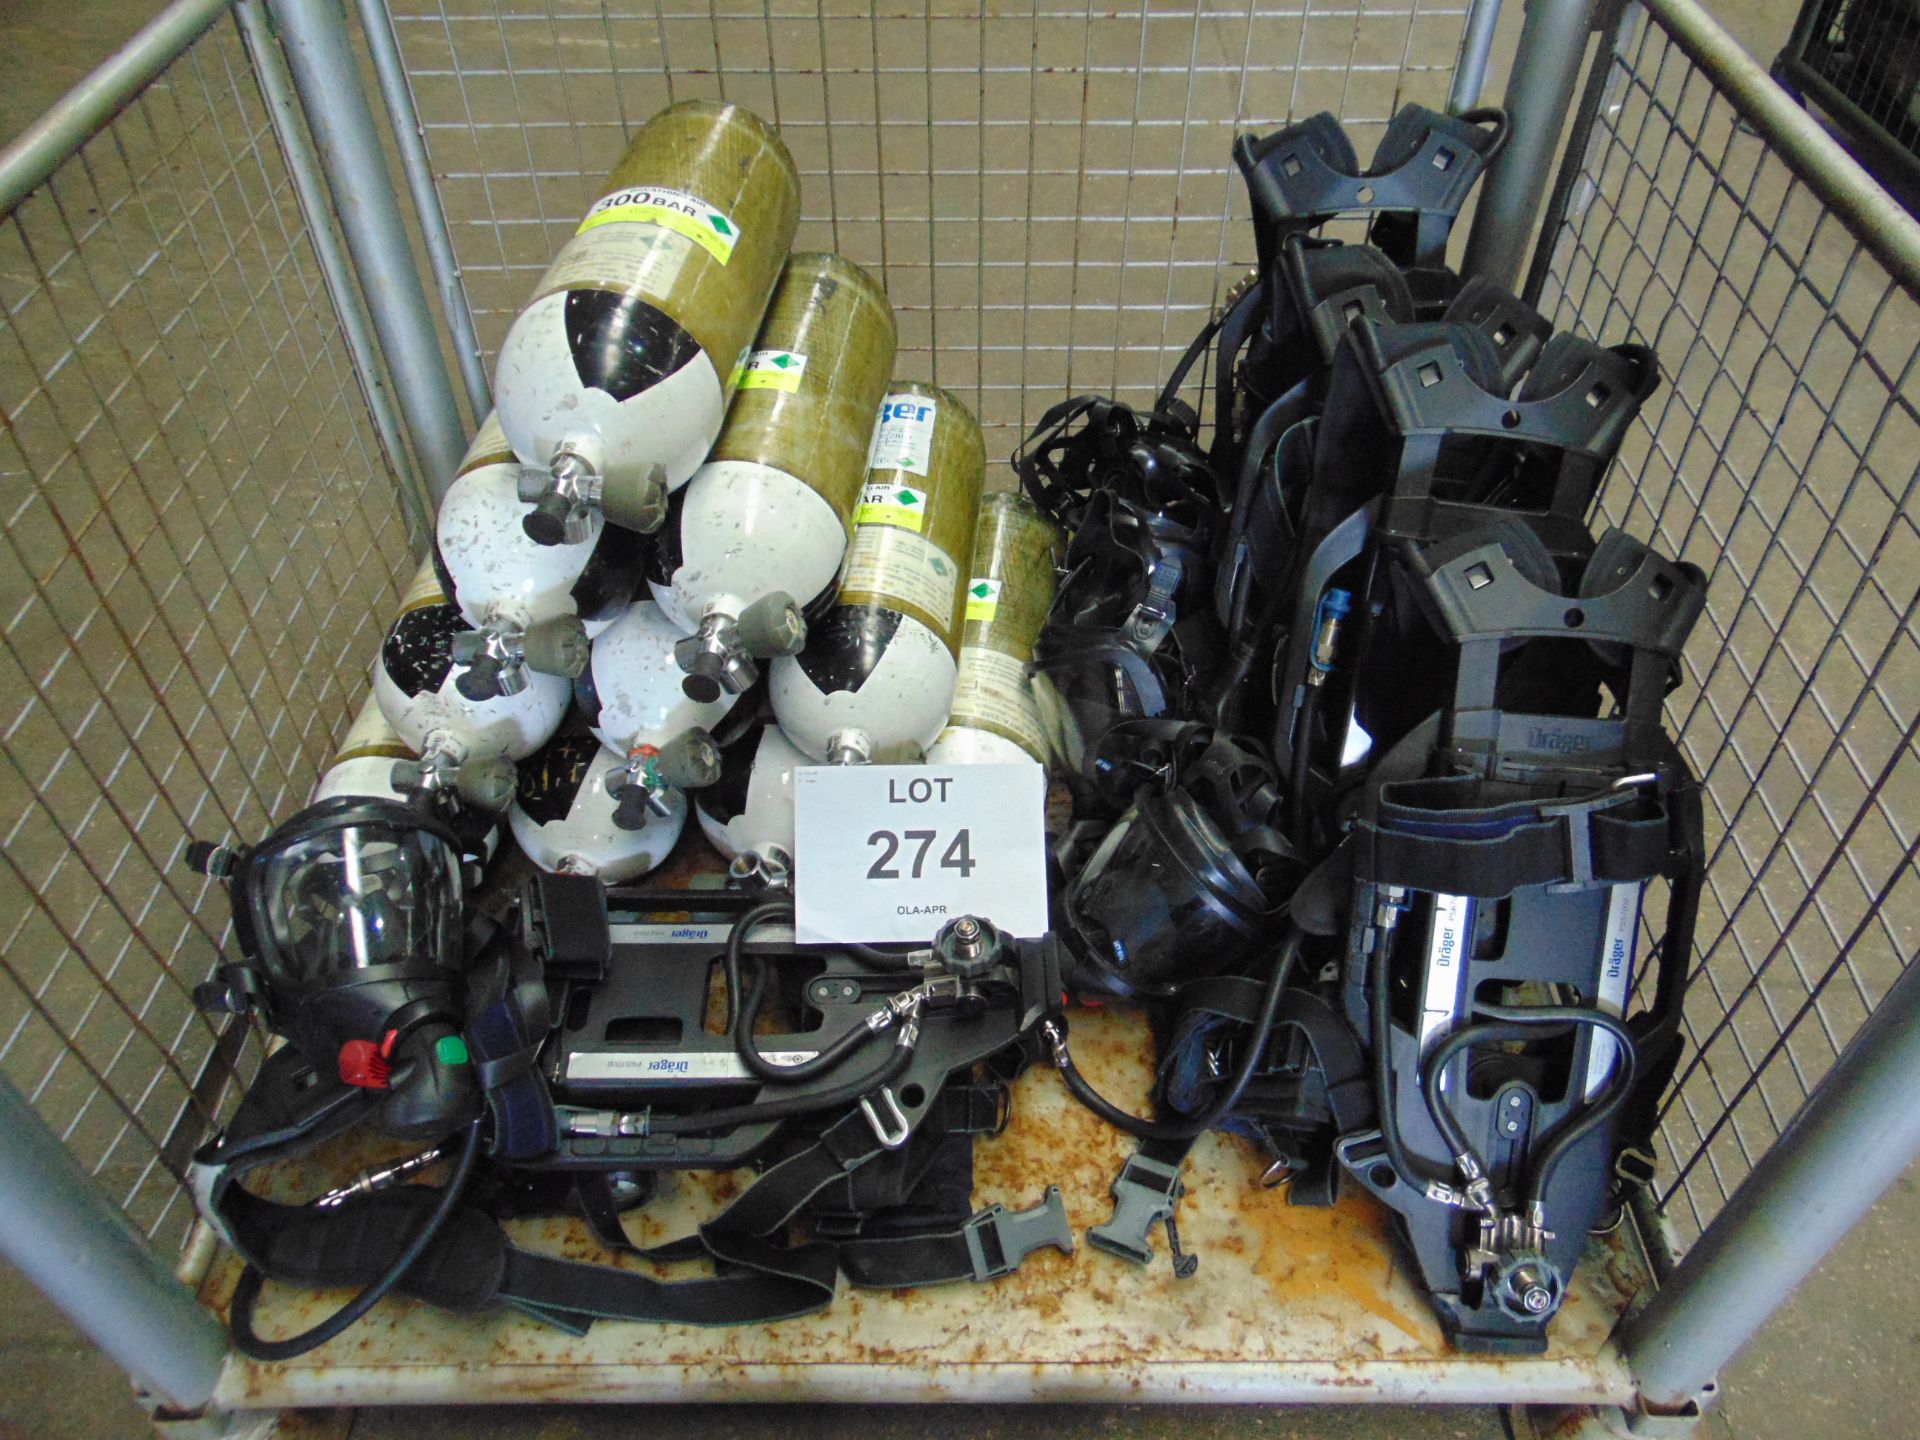 5 x Drager PSS 7000 Self Contained Breathing Apparatus w/ 10 x Drager 300 Bar Air Cylinders - Image 18 of 21